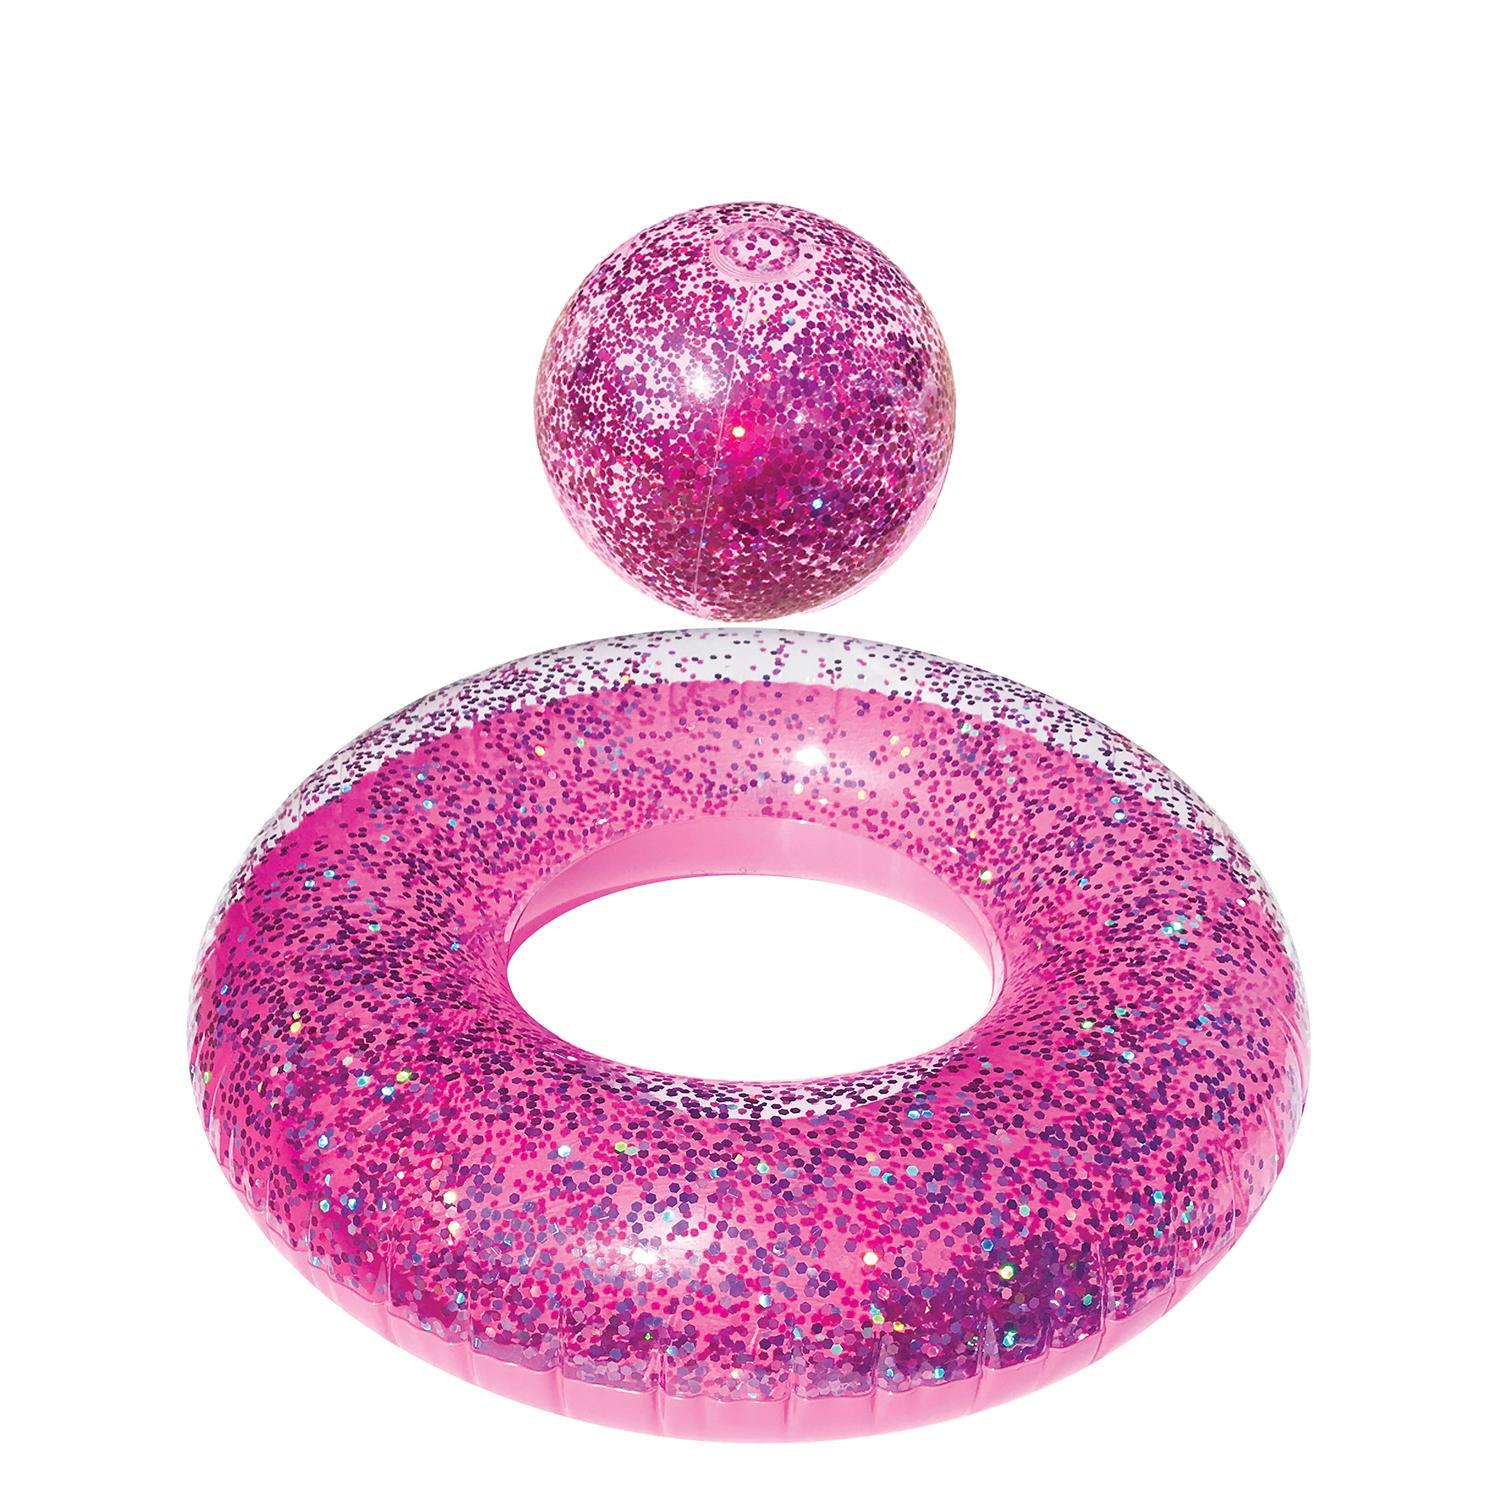 NEW PALM BEACH BLING SWIM RING & BEACH BALL SET INFLATABLE POOL TOY [Colour: Colour : Pink]